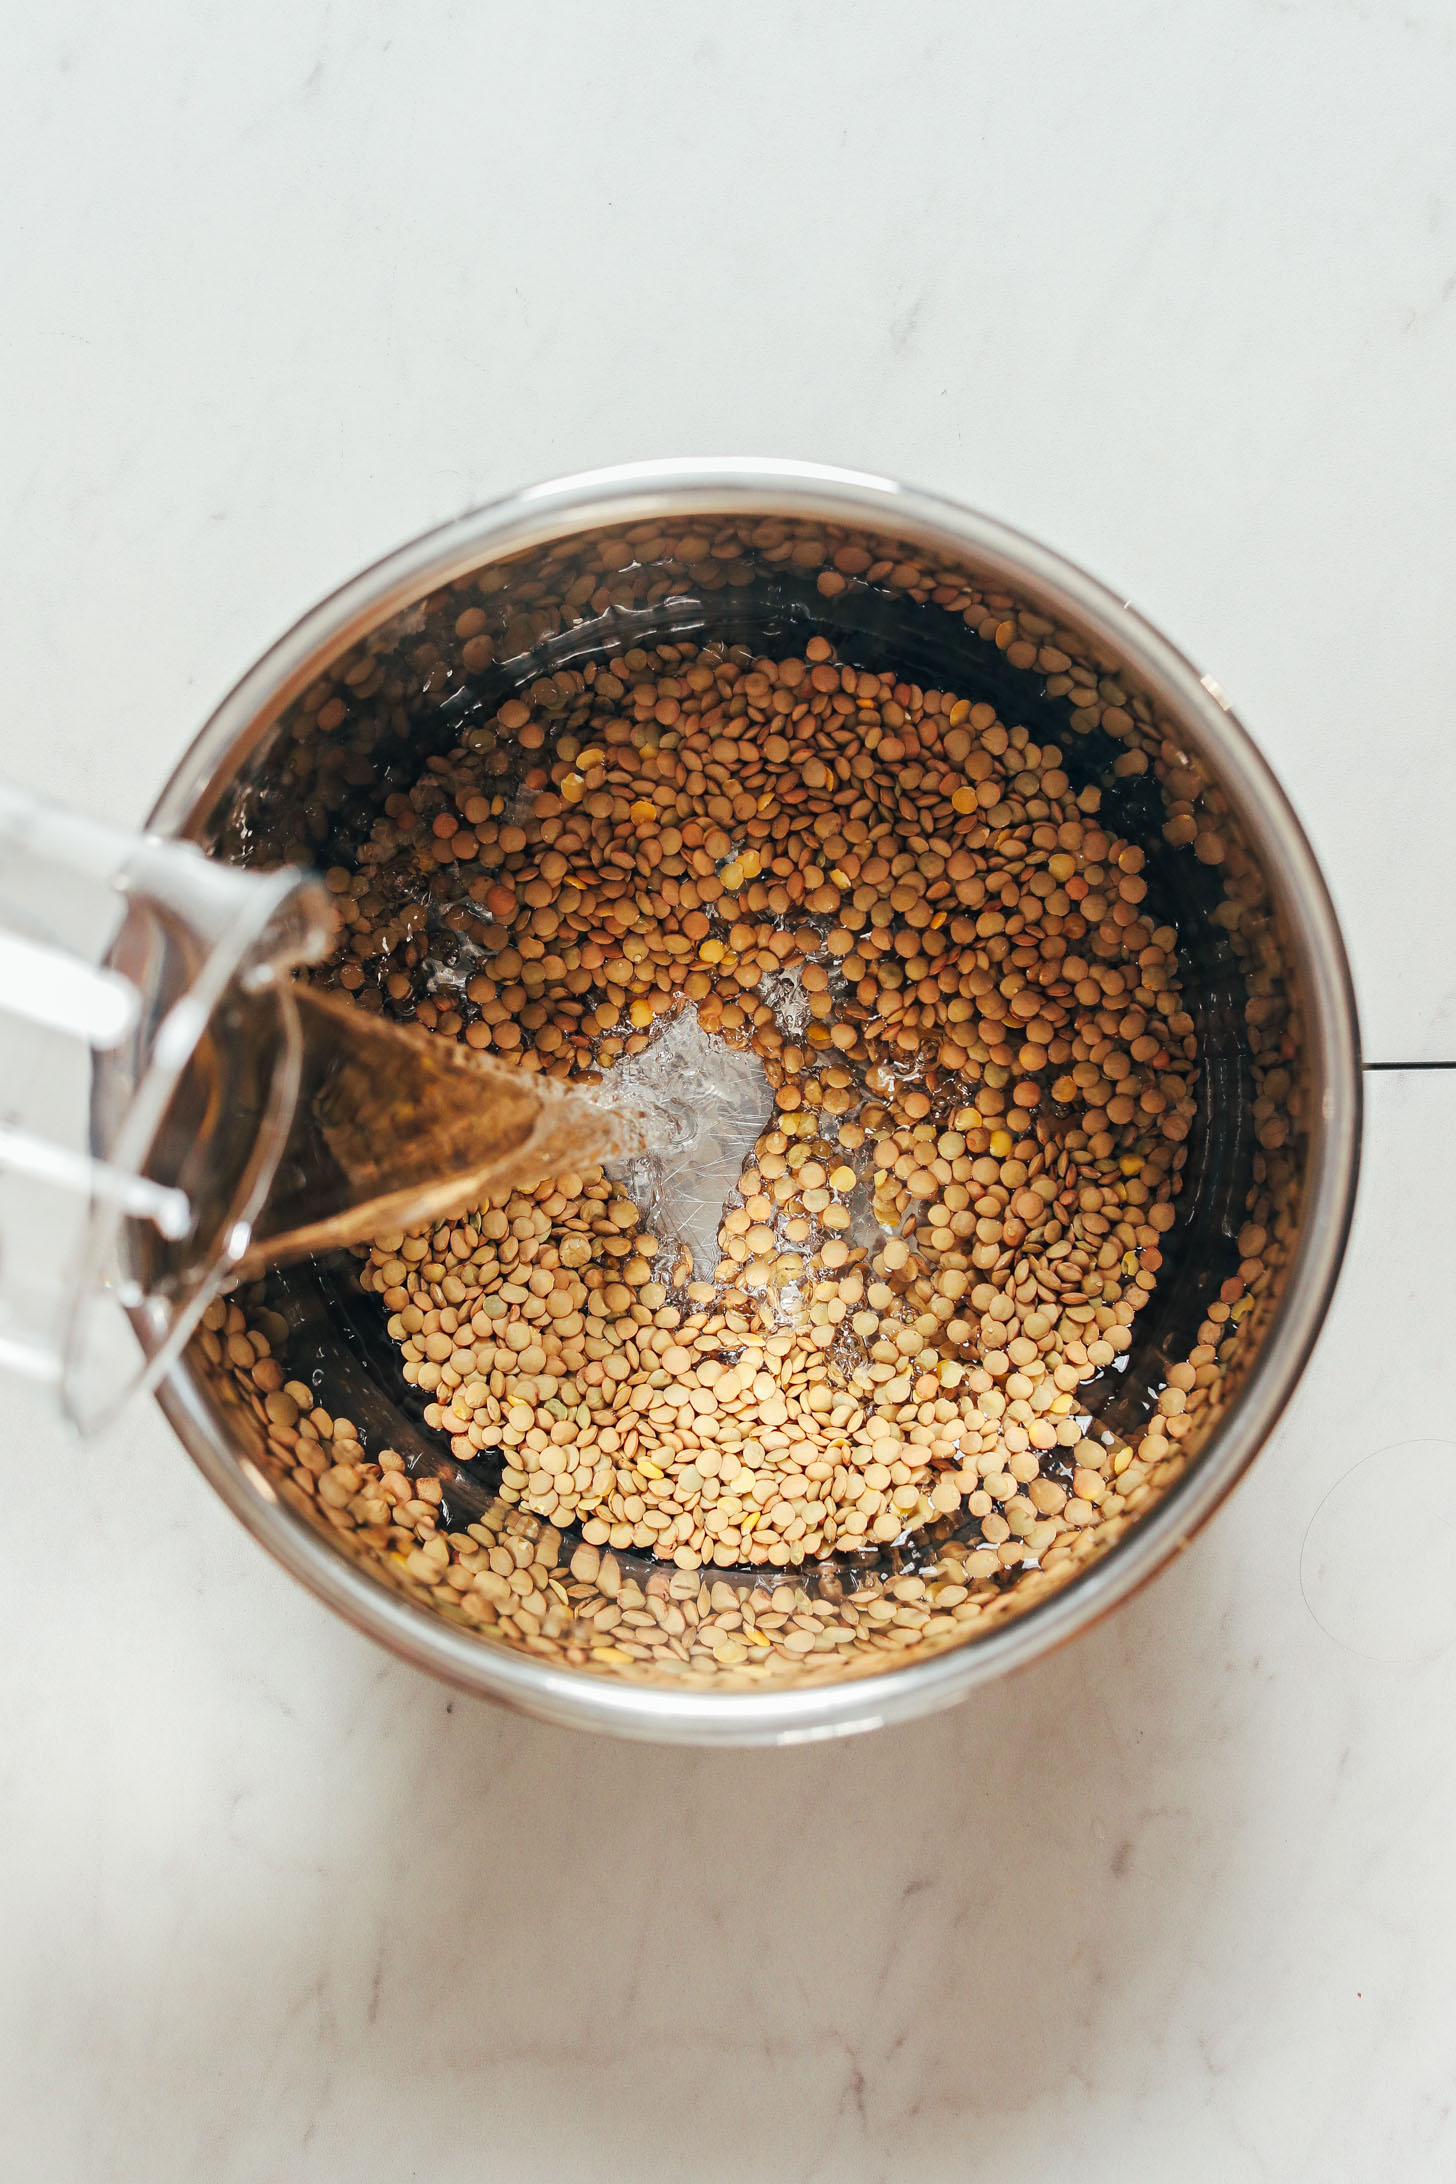 Pouring water over dry lentils